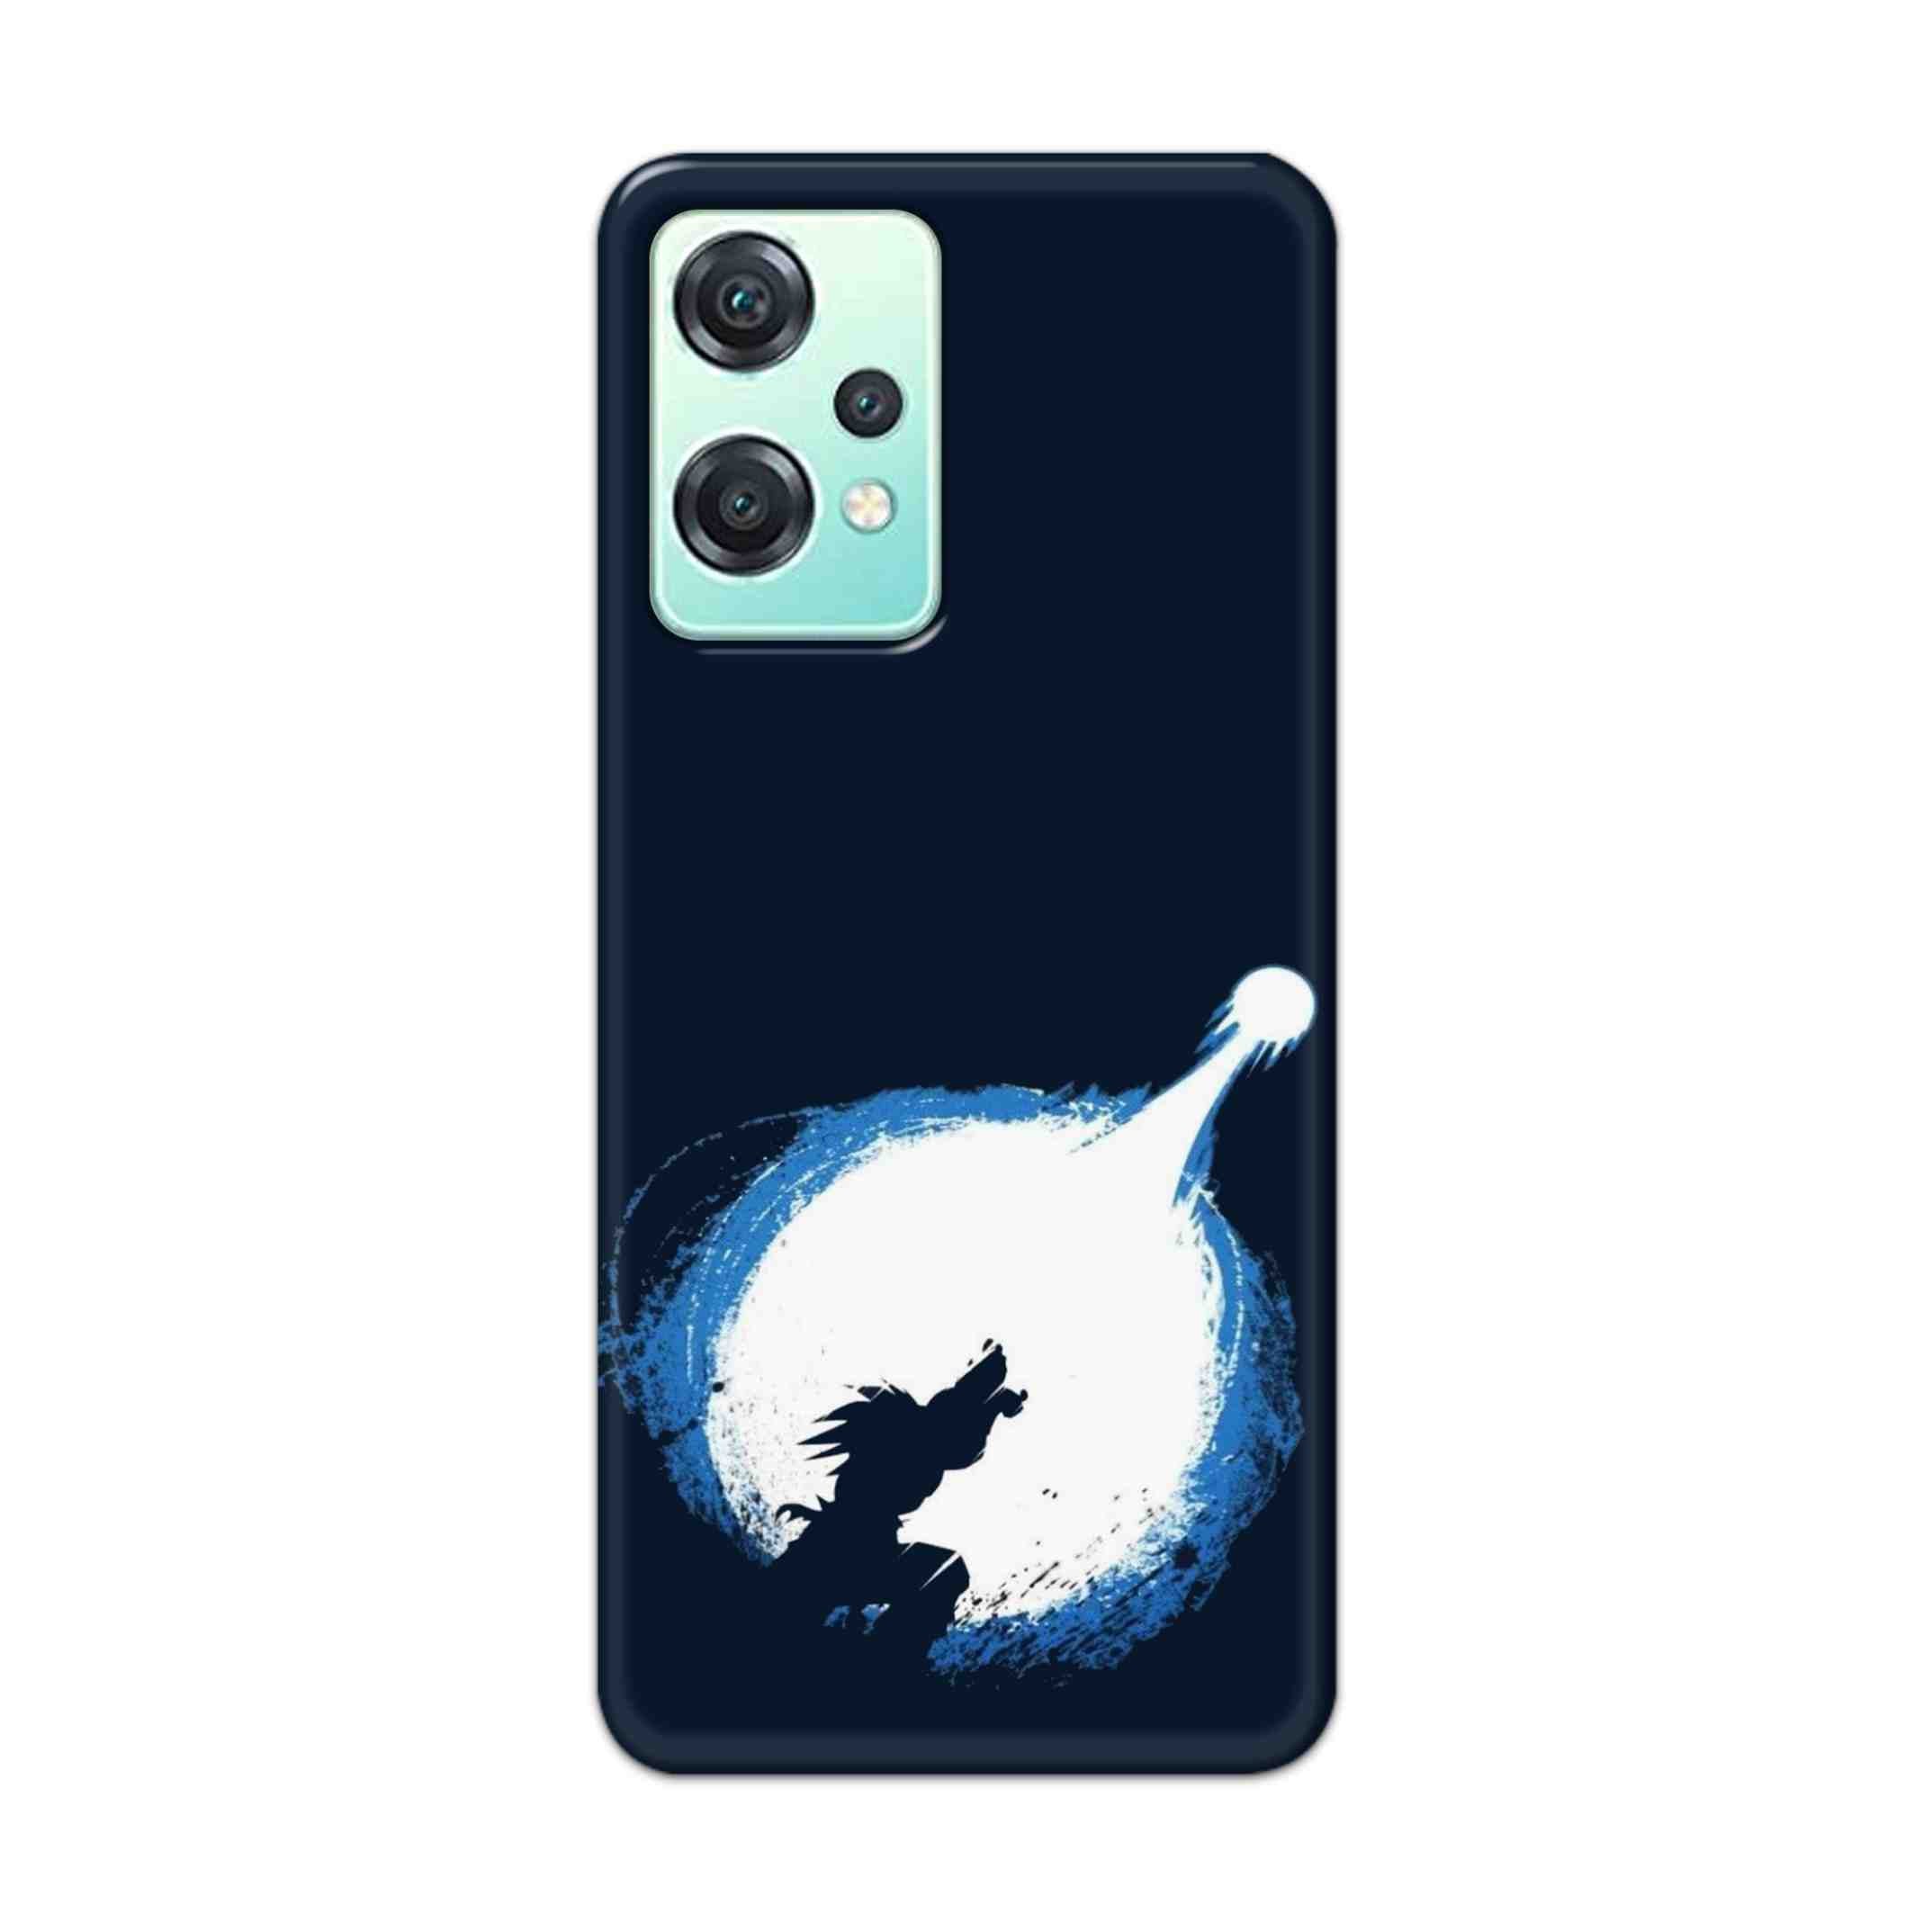 Buy Goku Power Hard Back Mobile Phone Case Cover For OnePlus Nord CE 2 Lite 5G Online